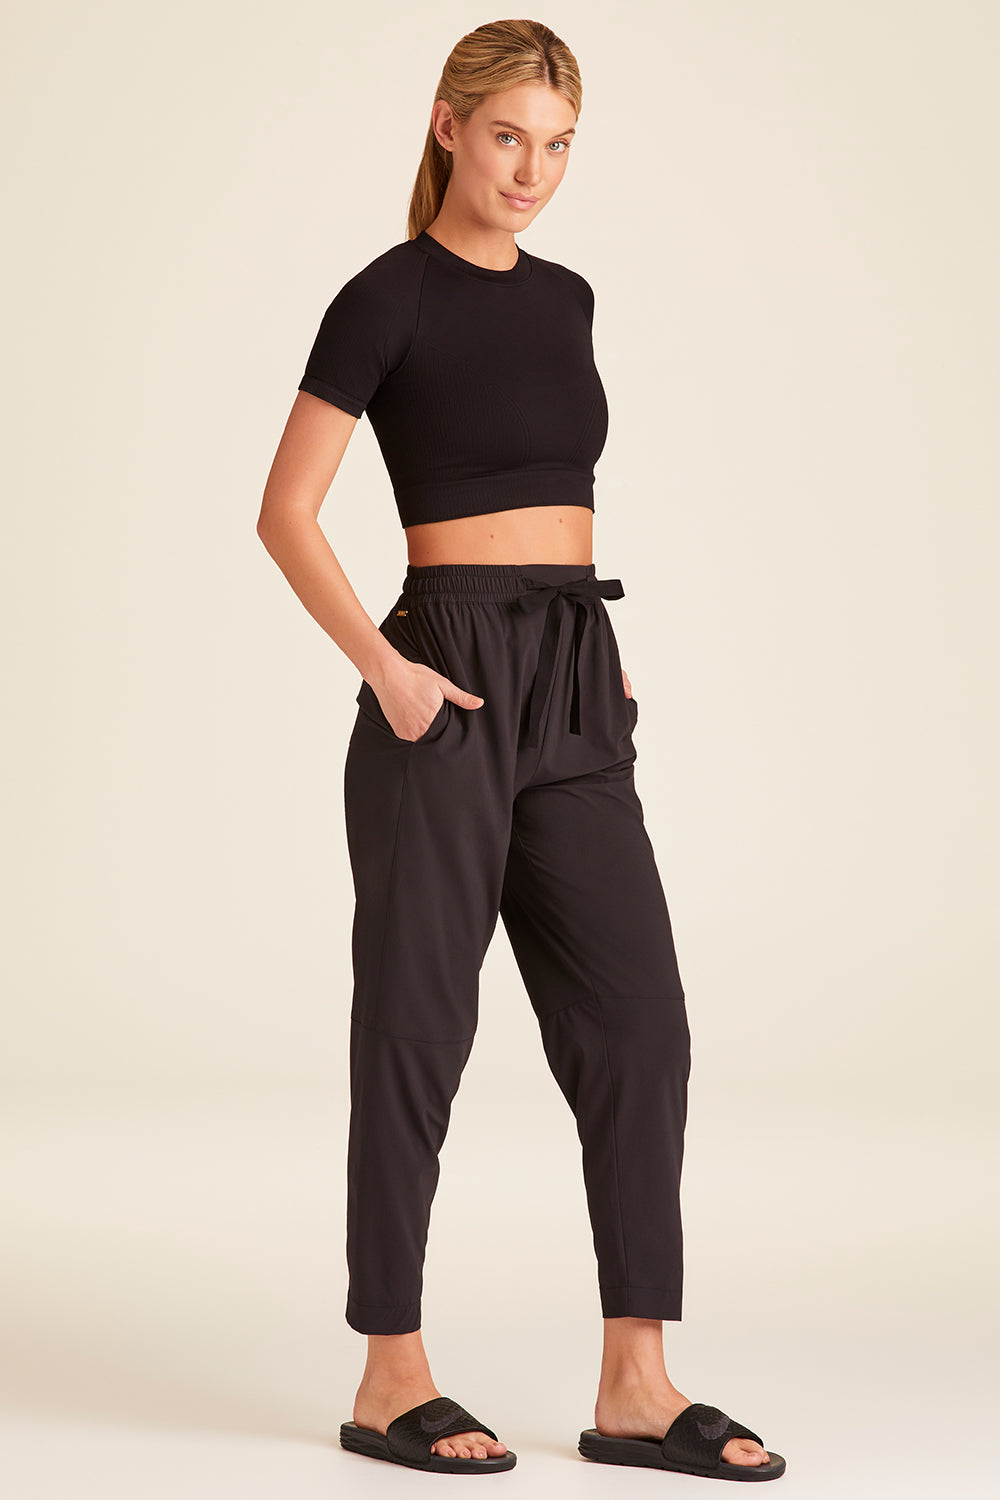 Full body front view of Alala Luxury Women's Athleisure commuter pant in black